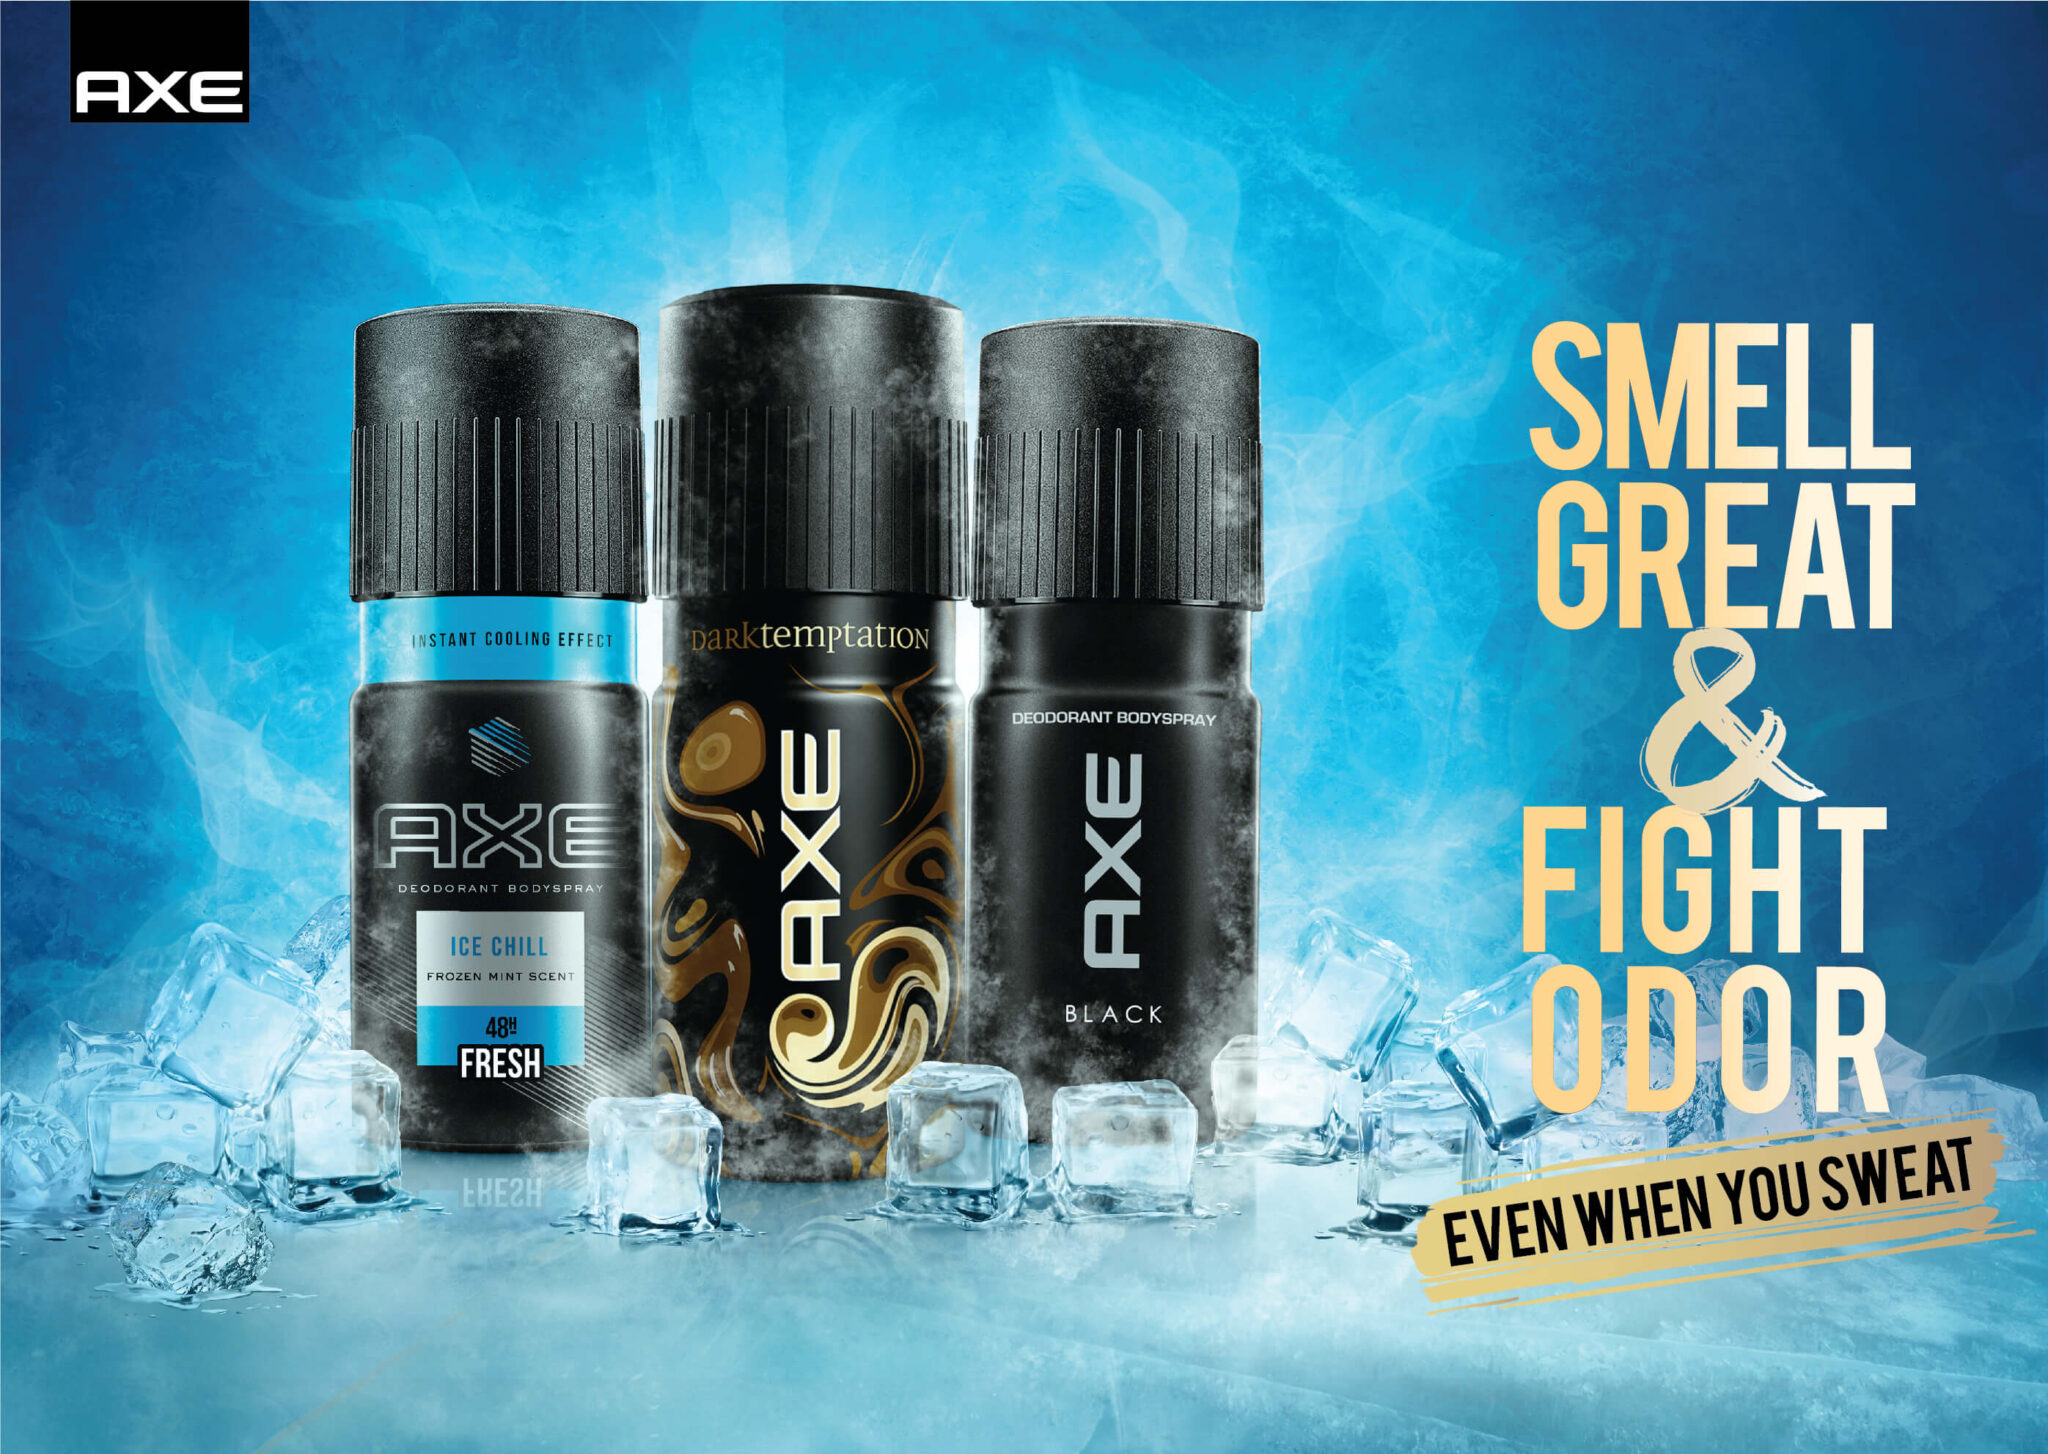 AXE Smell Great And Fight Odor Even When You Sweat